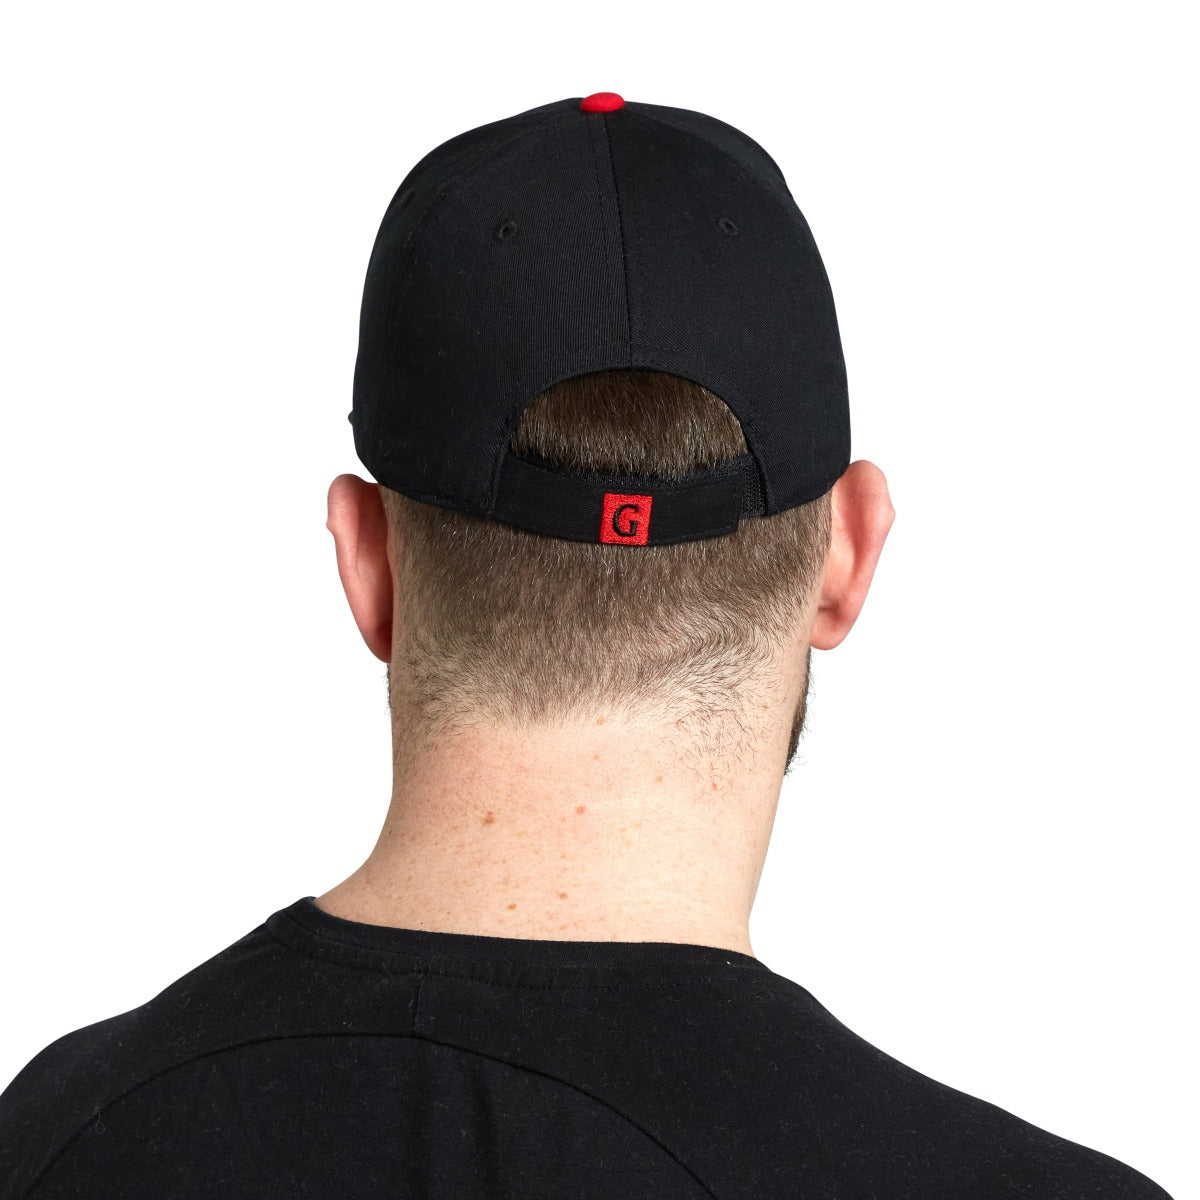 The back view of a man wearing a Guinness Toucan Baseball Cap.